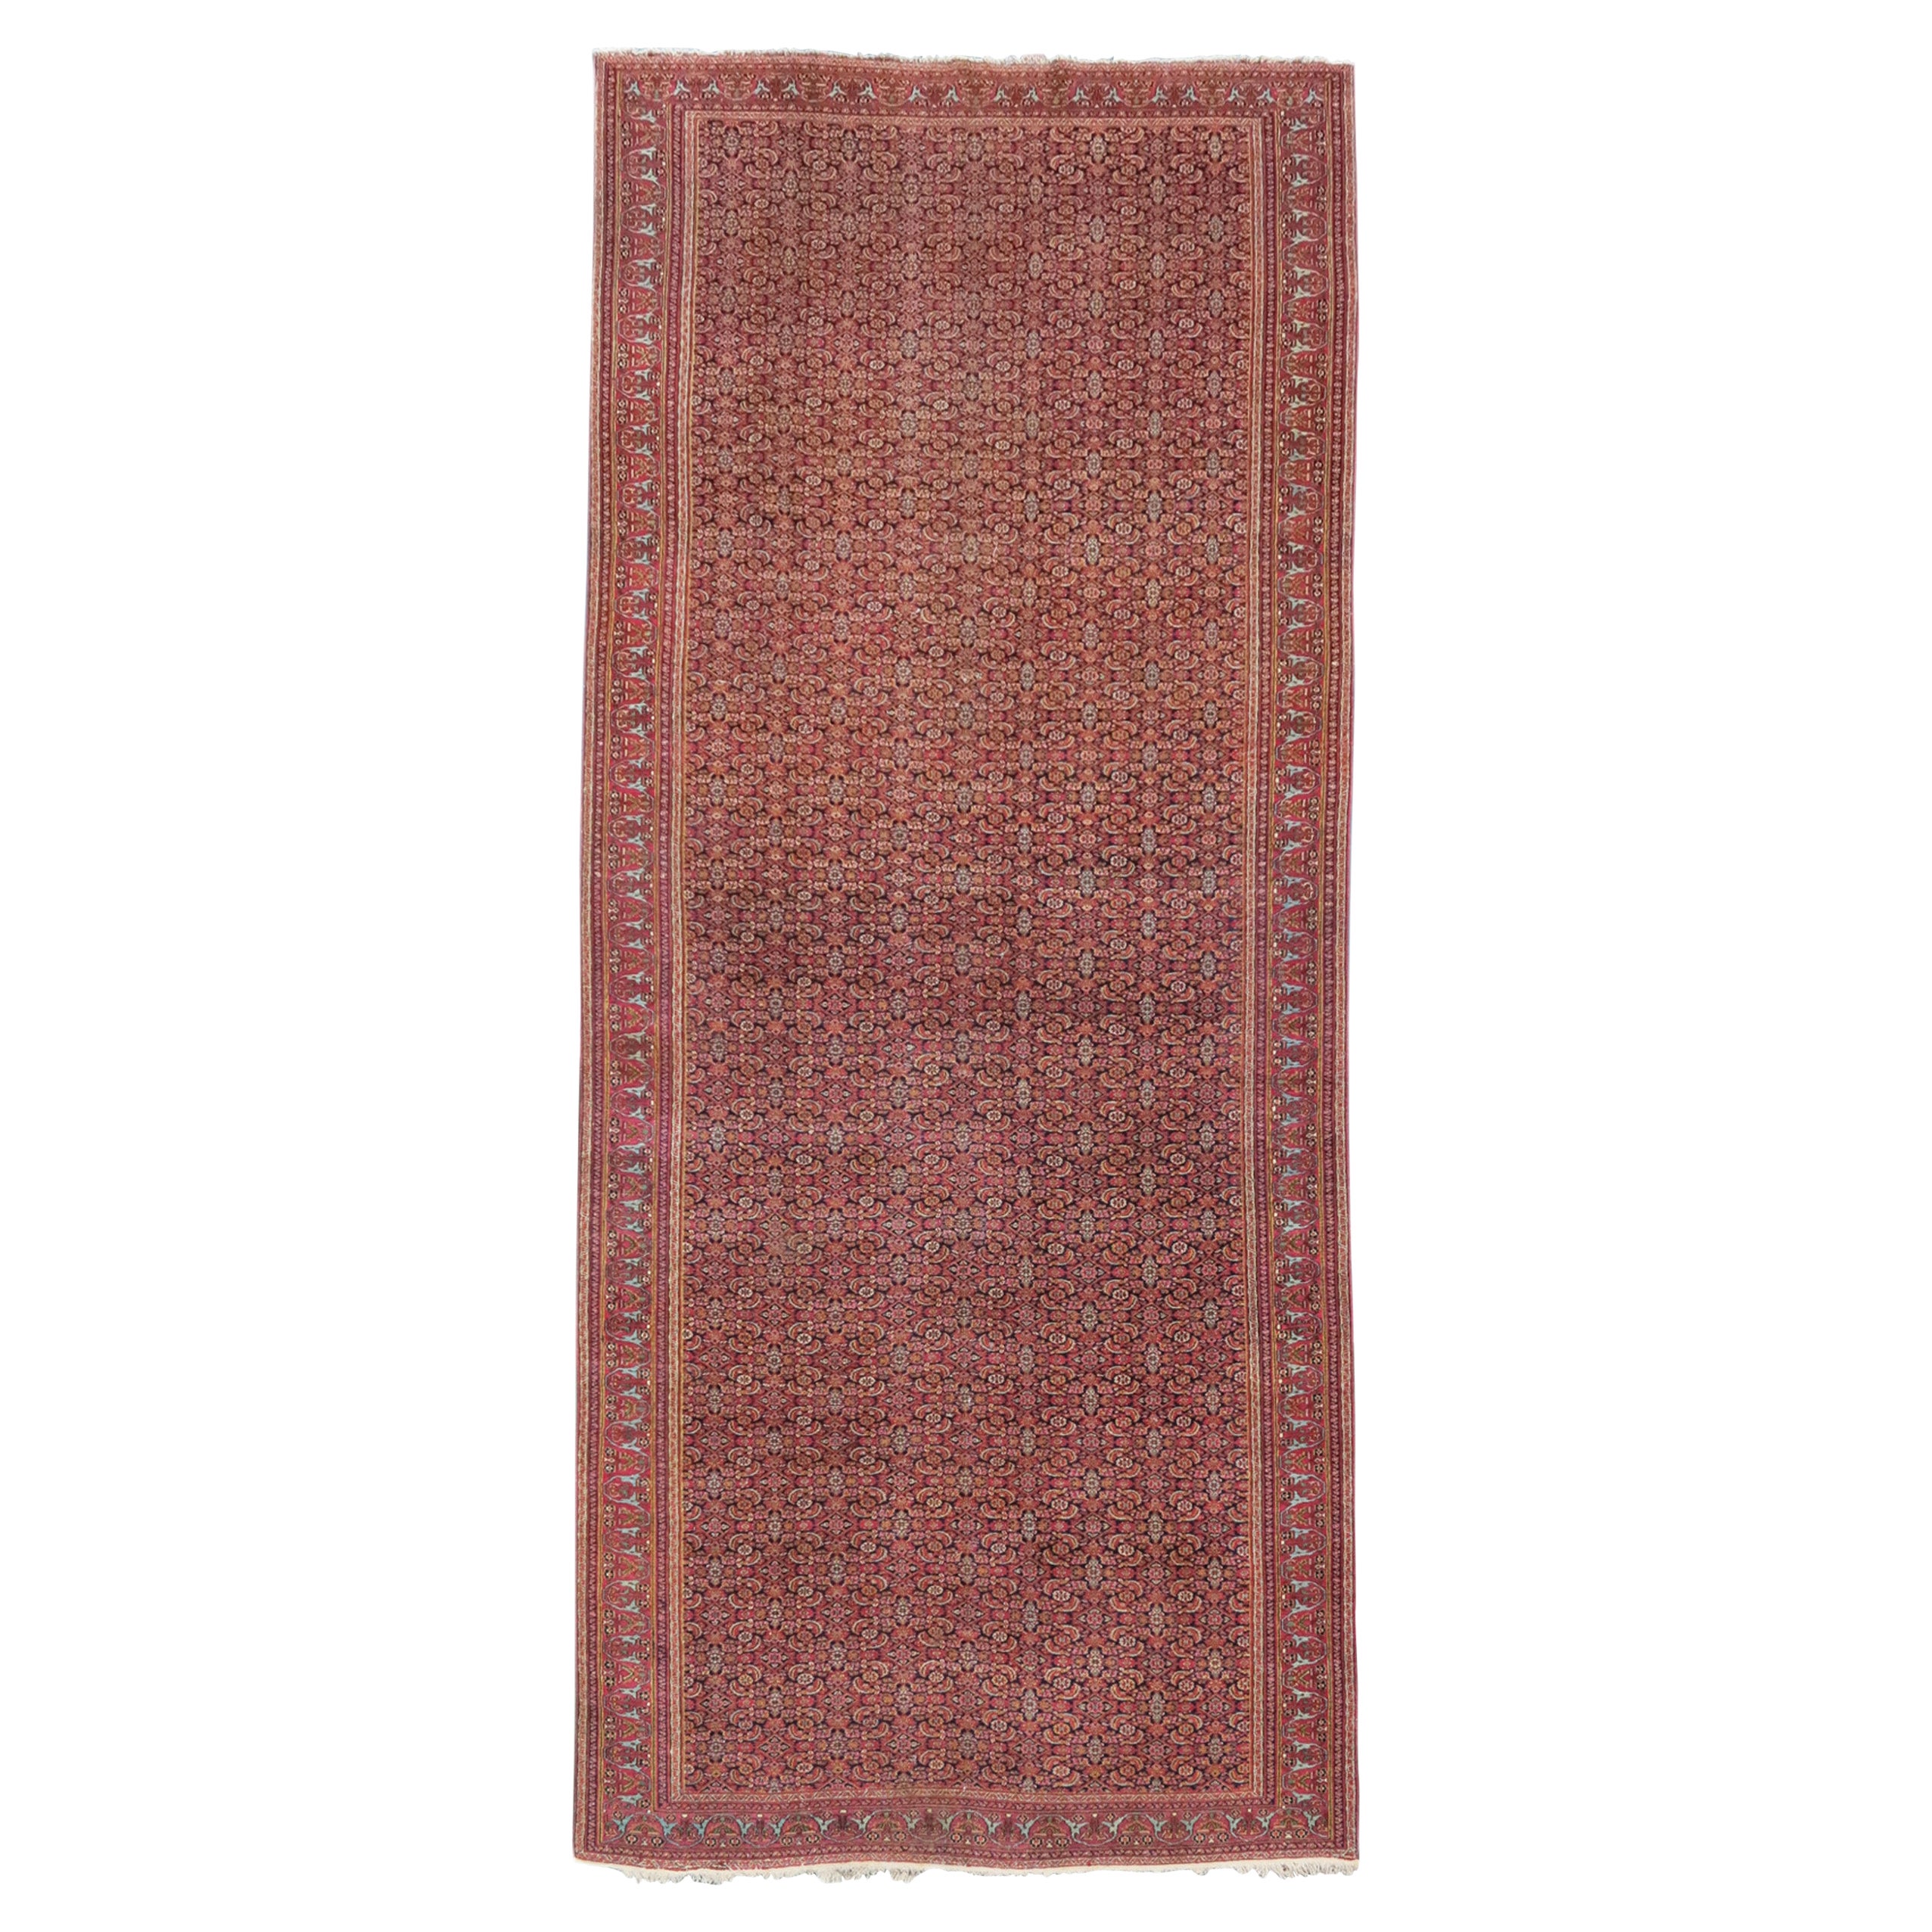 Khorassan Gallery Carpet, Late 19th century For Sale